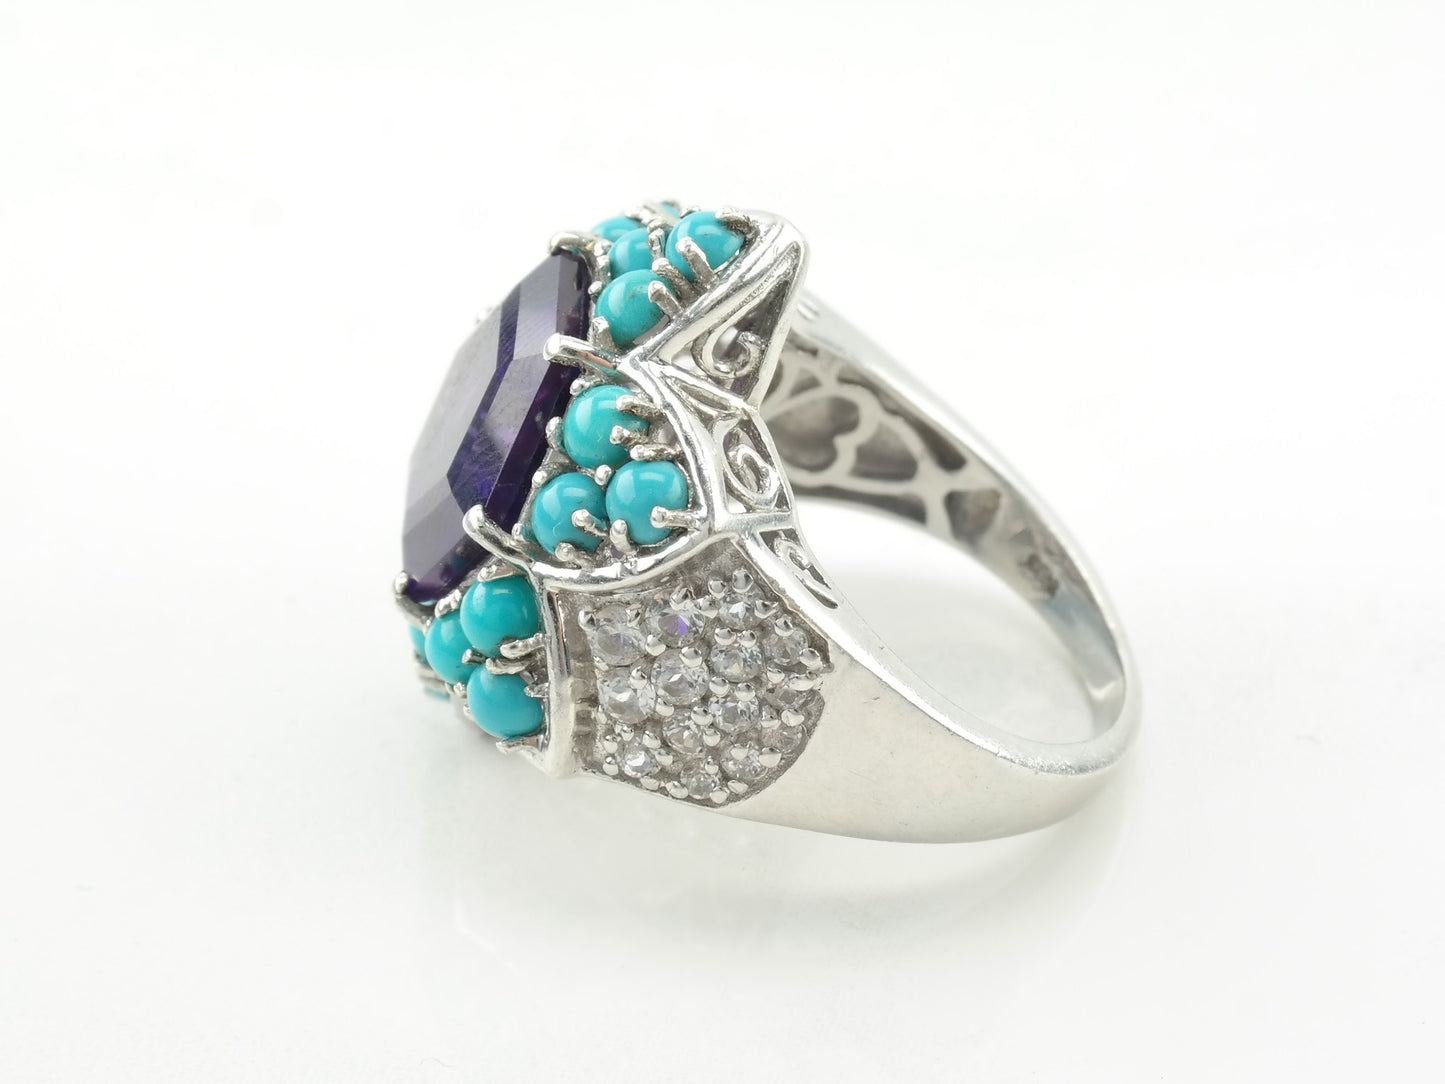 Vintage Cocktail Ring Amethyst Turquoise Star Sterling Silver Size 8 1/4